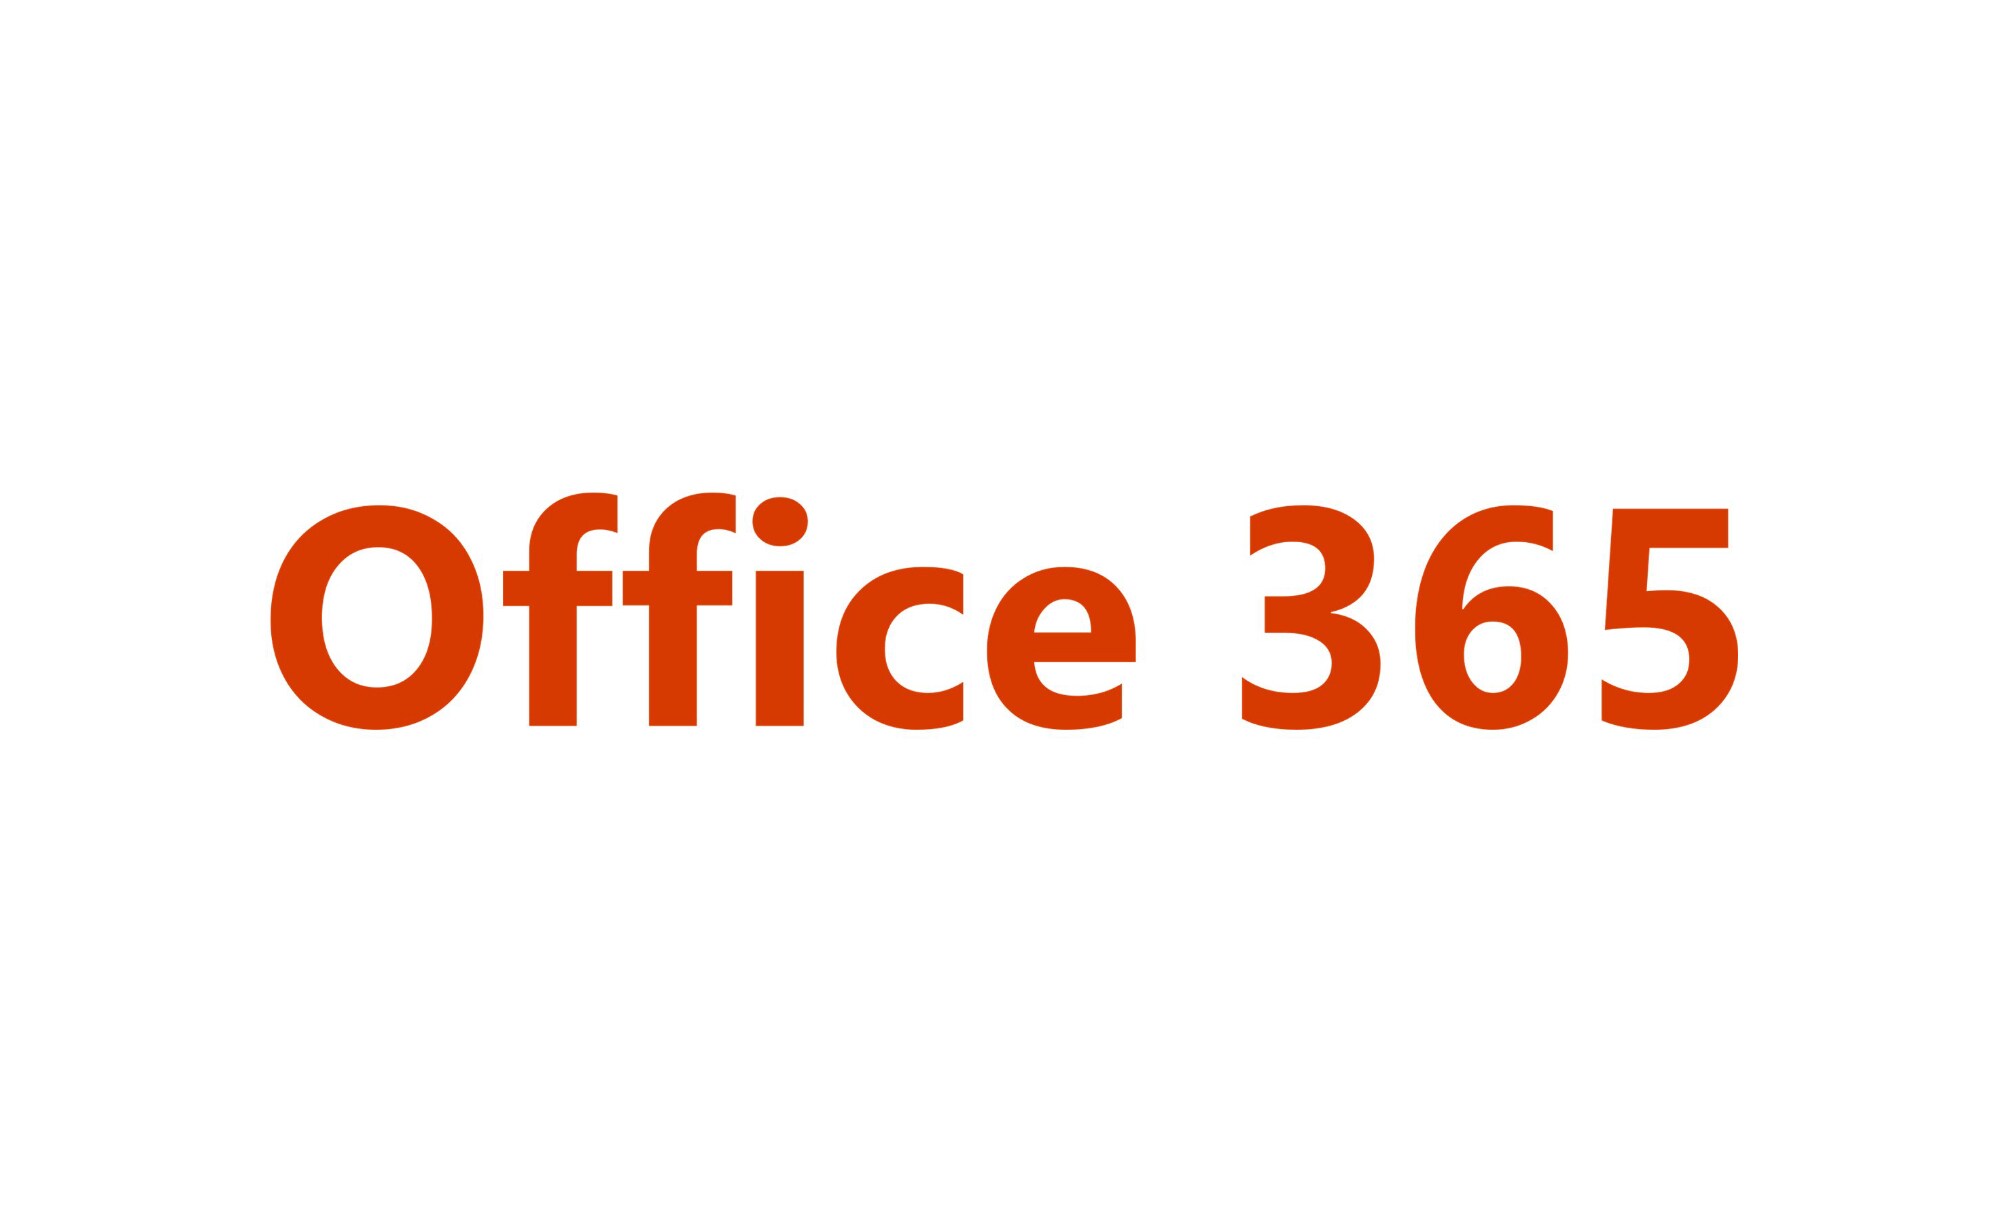 Microsoft Office 365 Advanced Threat Protection Subscription